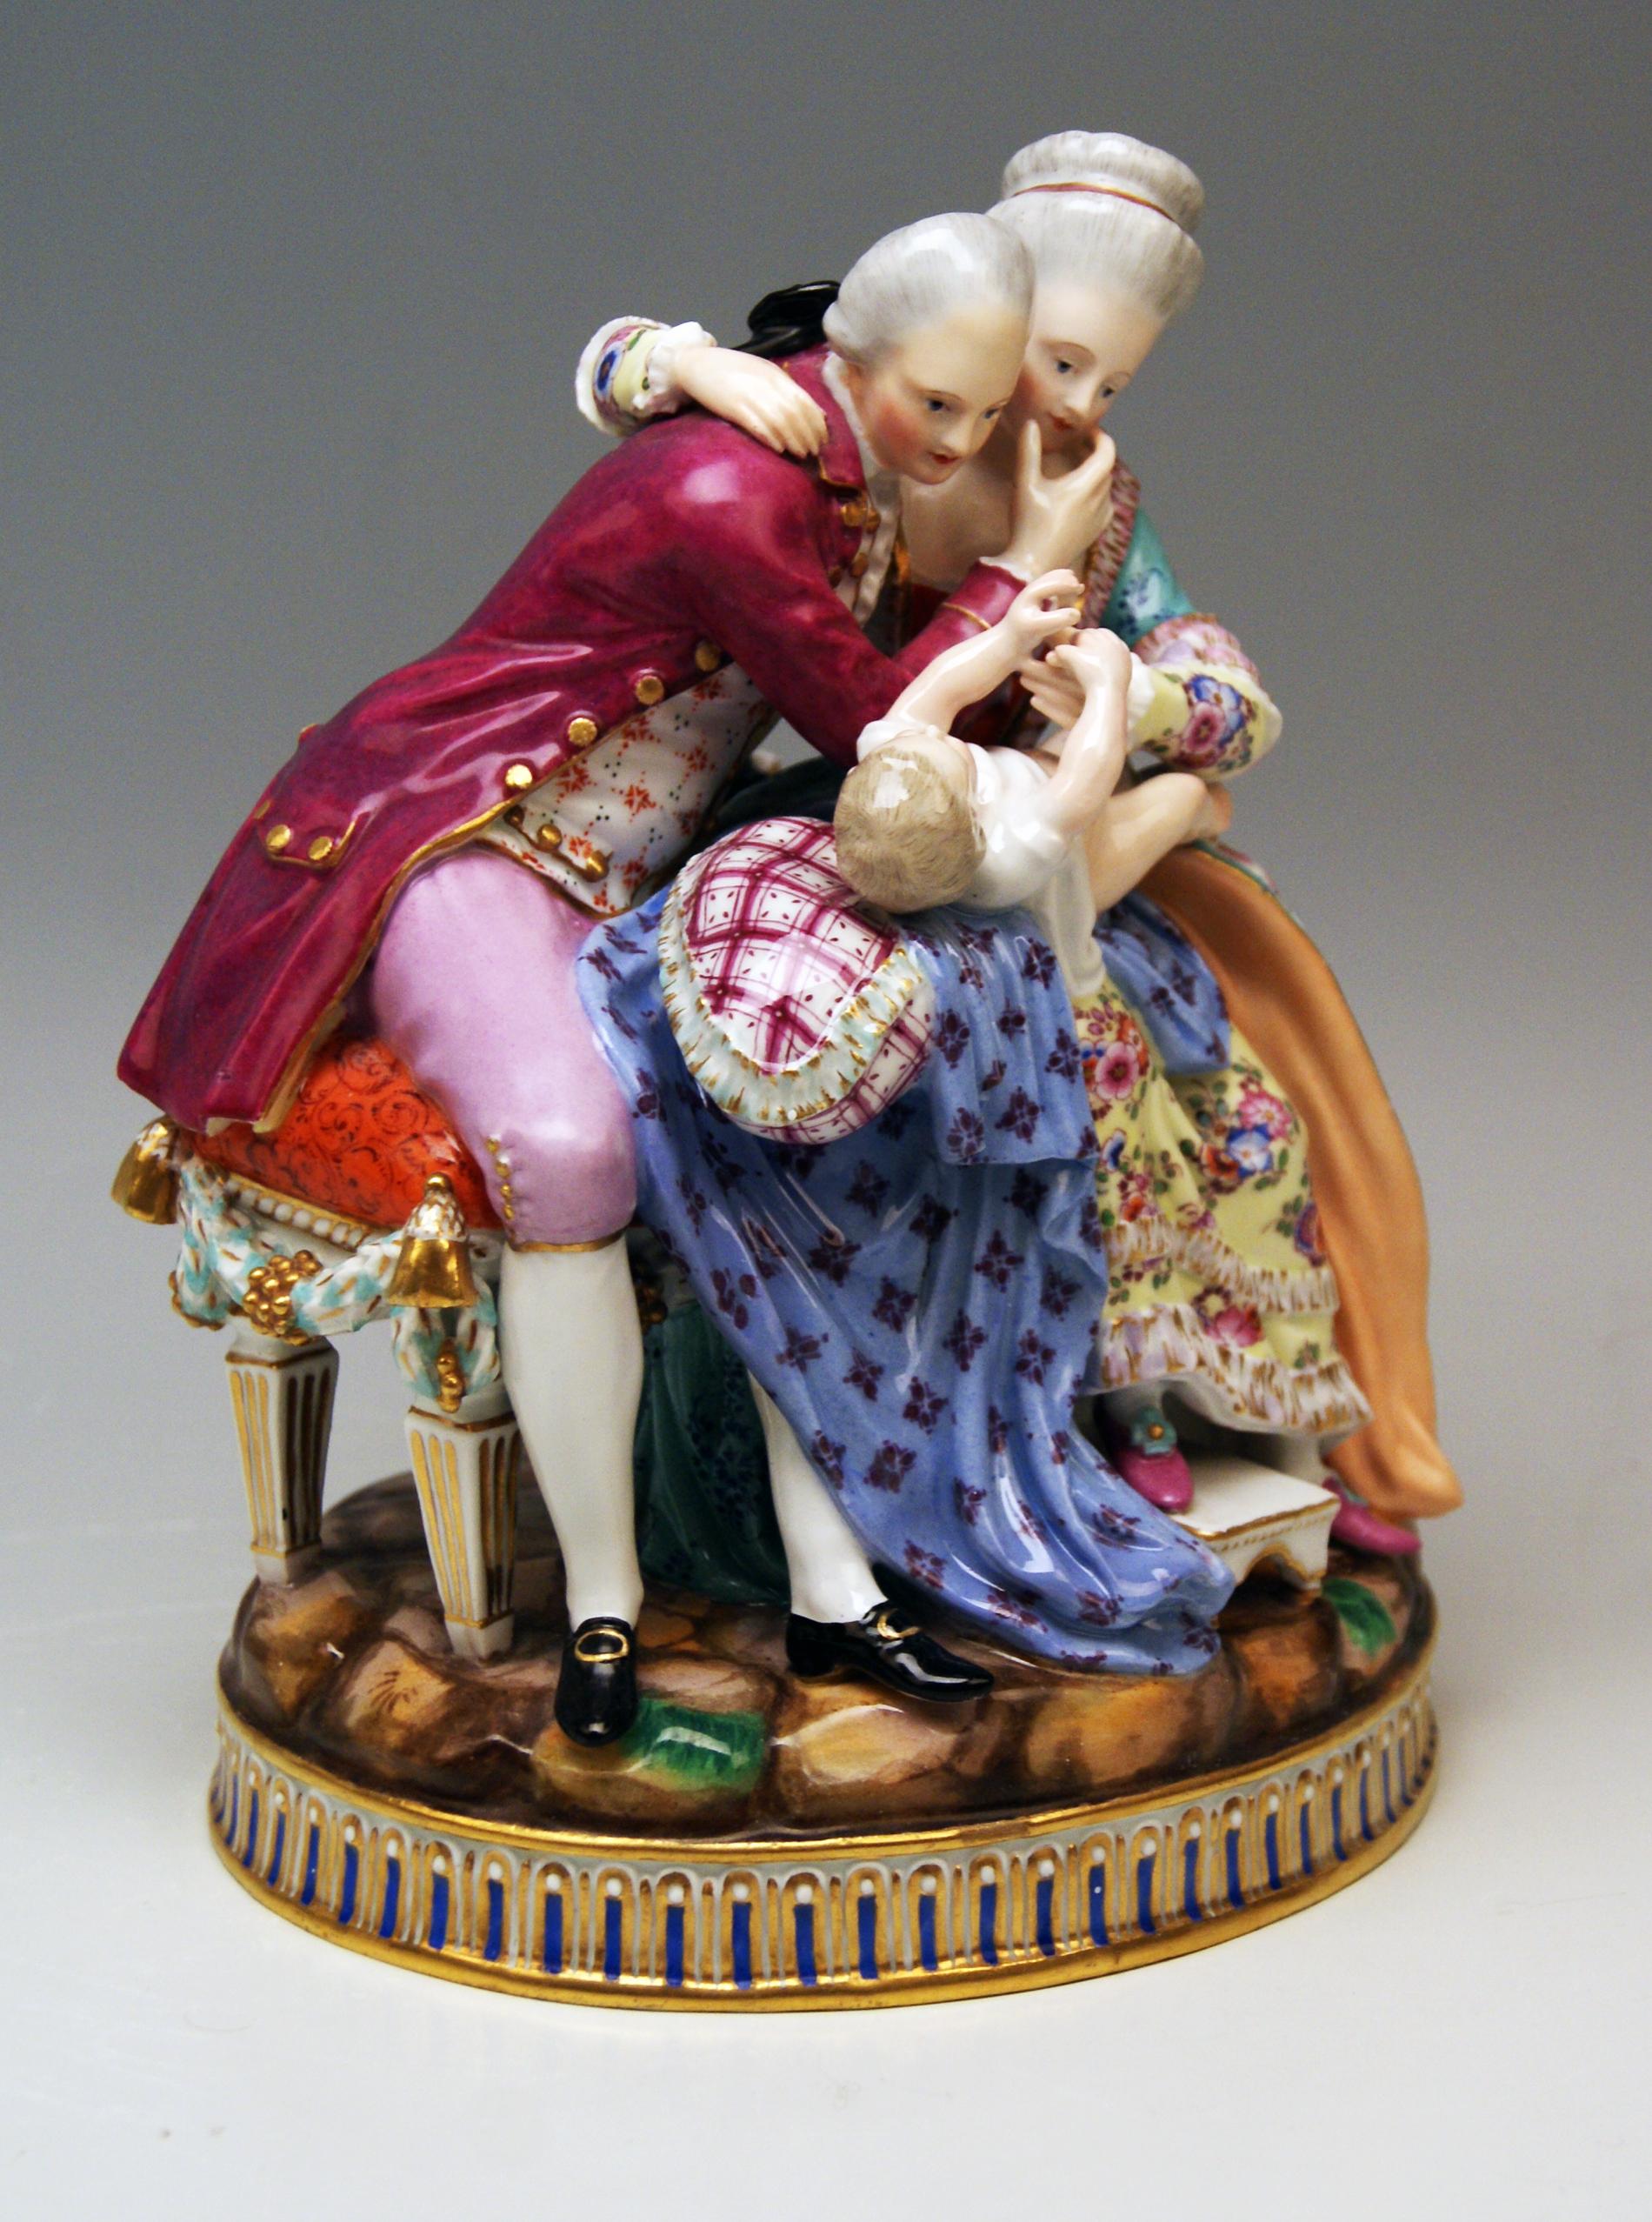 Meissen gorgeous figurine group: The Lucky Parents, created by Michel Victor Acier (c. 1770-72)

Manufactory: Meissen
Hallmarked: Blue Meissen Sword Mark (bottom not glazed)
First quality
Dating: !! Rococo Period / made circa 1773 !!
Material: